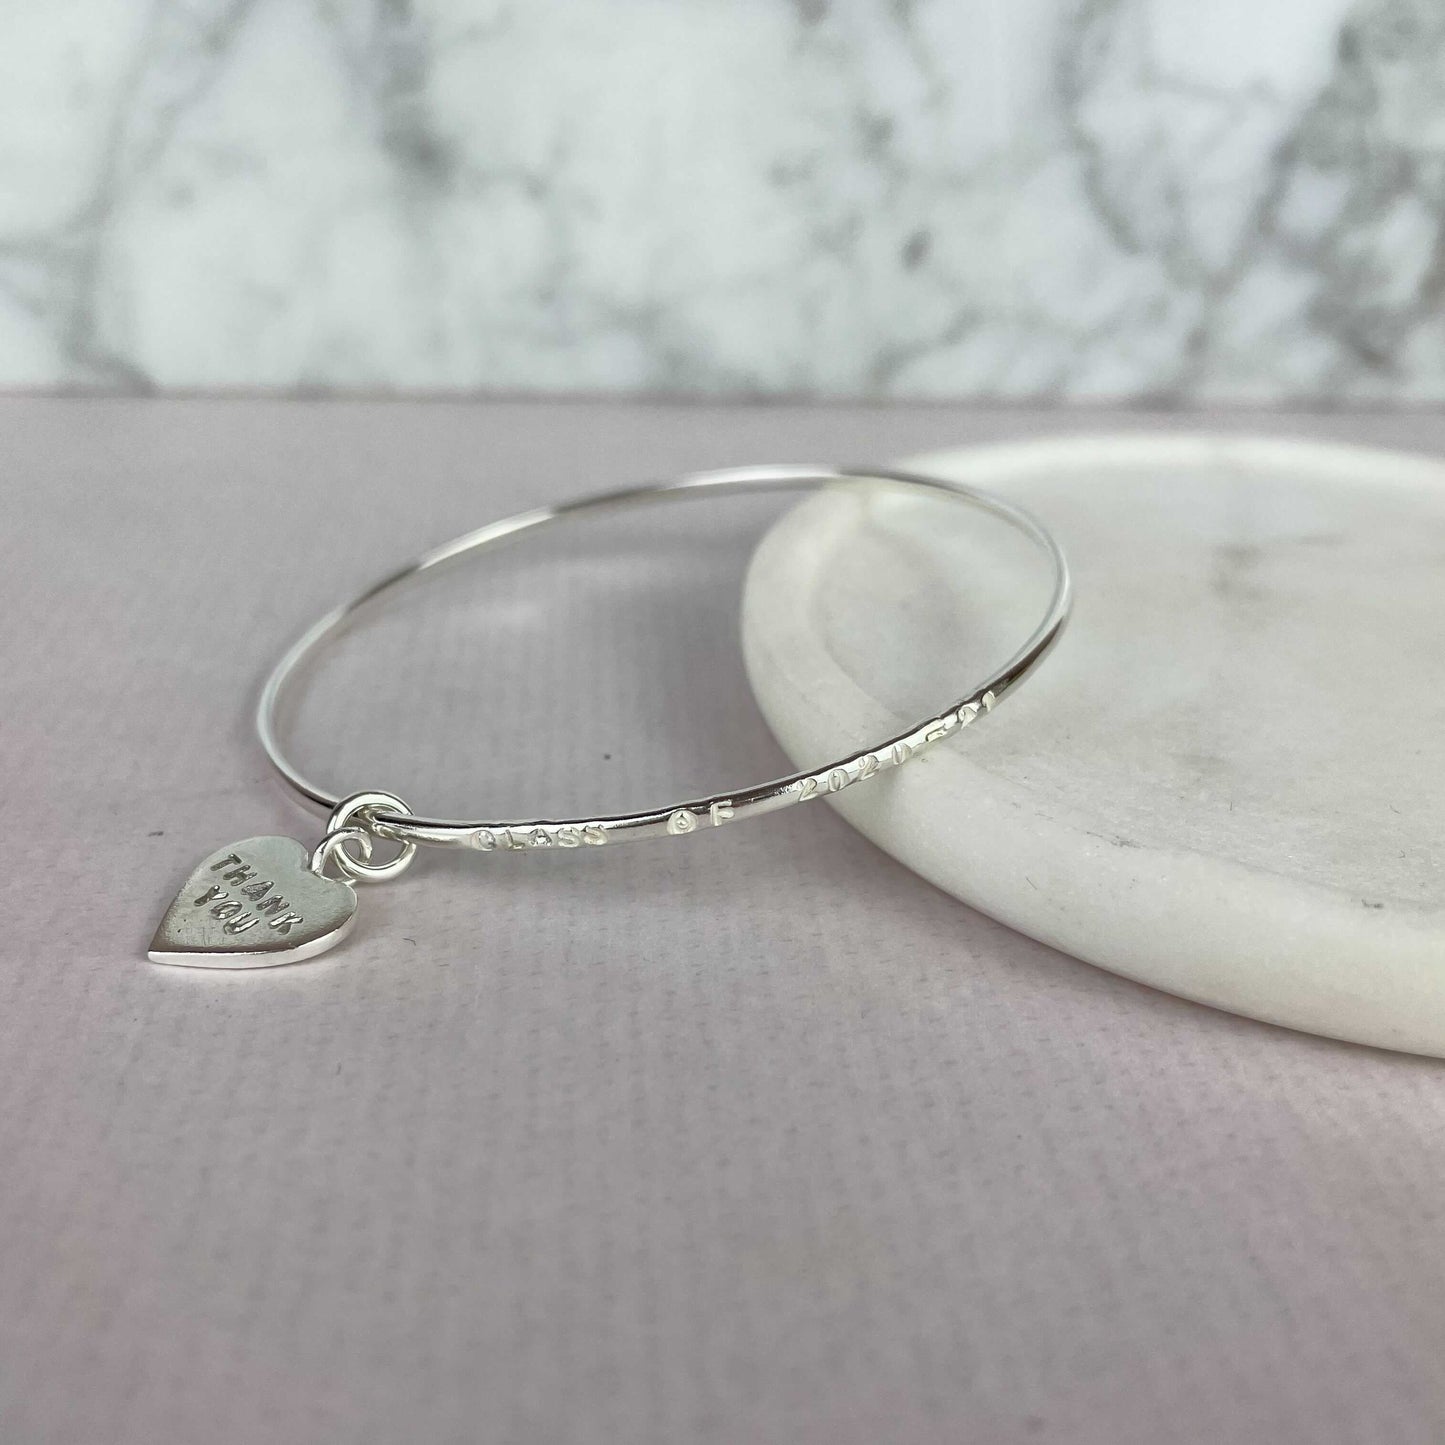 Thank The Teacher Gift - Personalised Silver Bangle